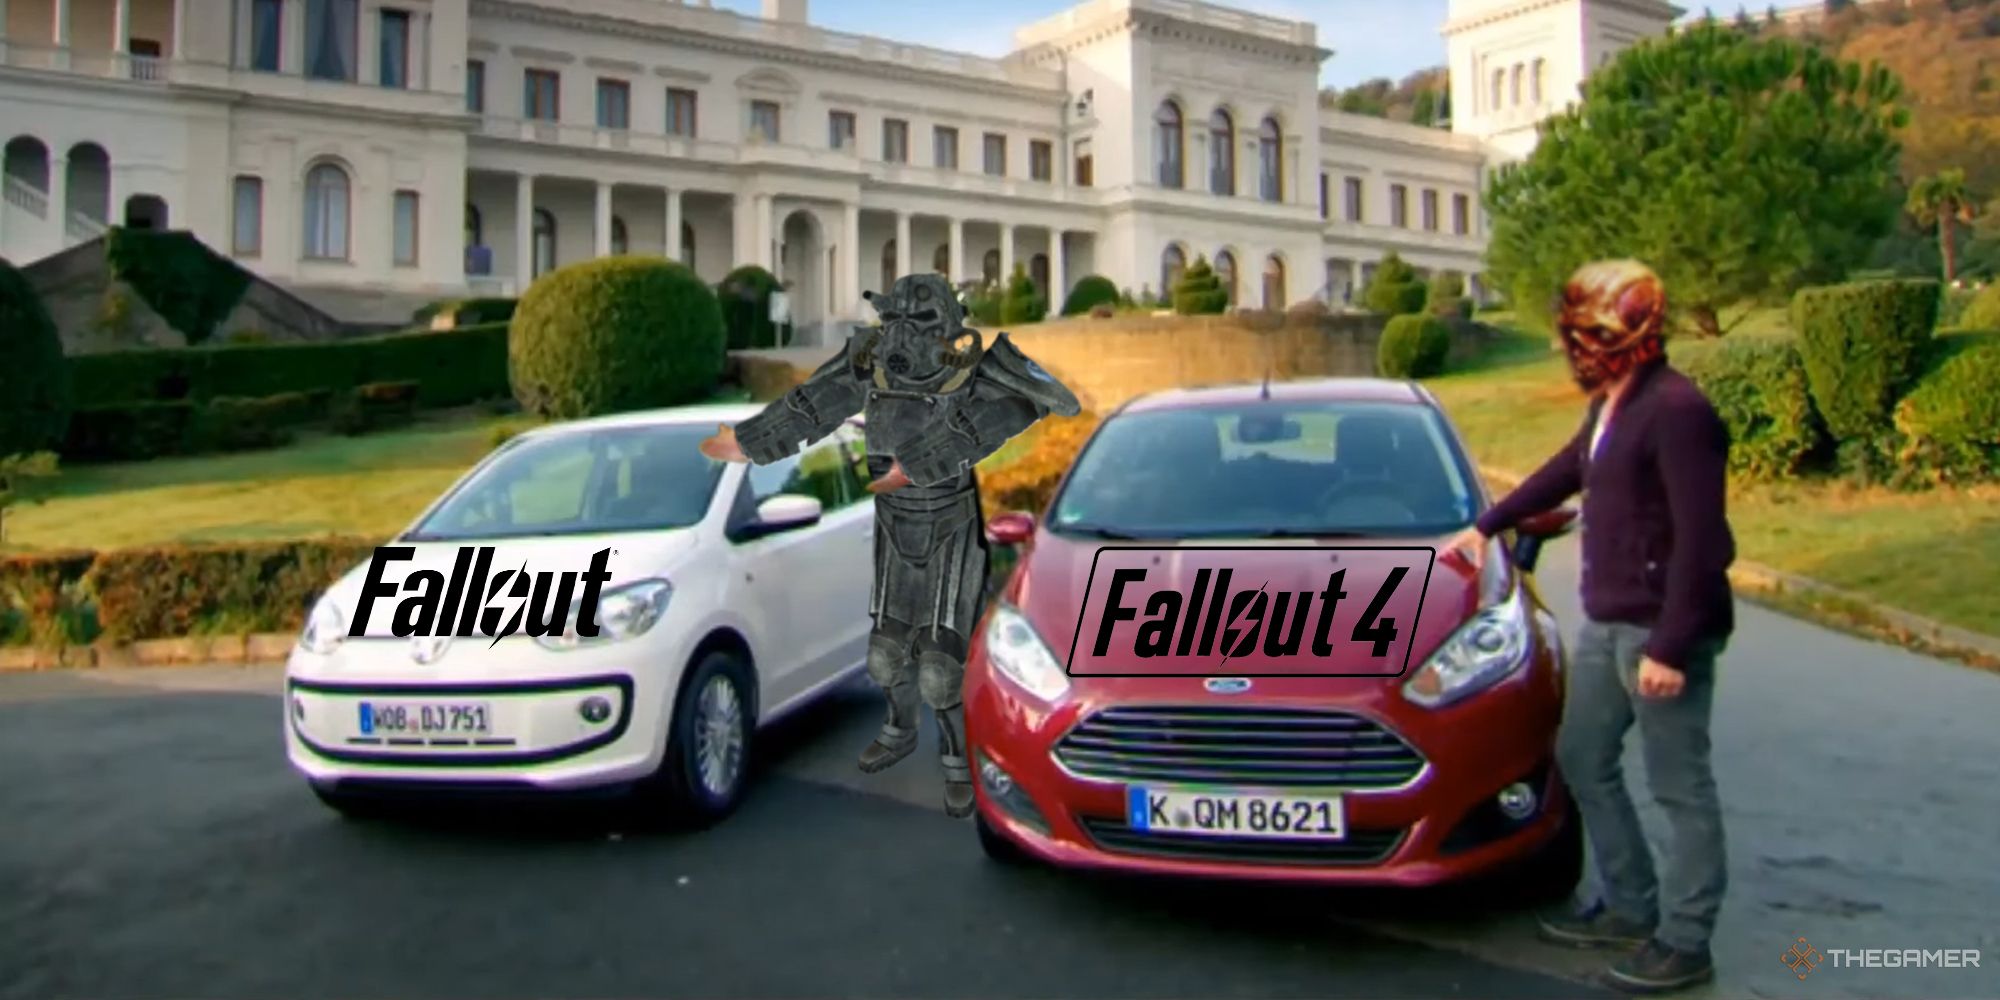 This is brilliant, but I like this meme but with Fallout the show and Fallout 4